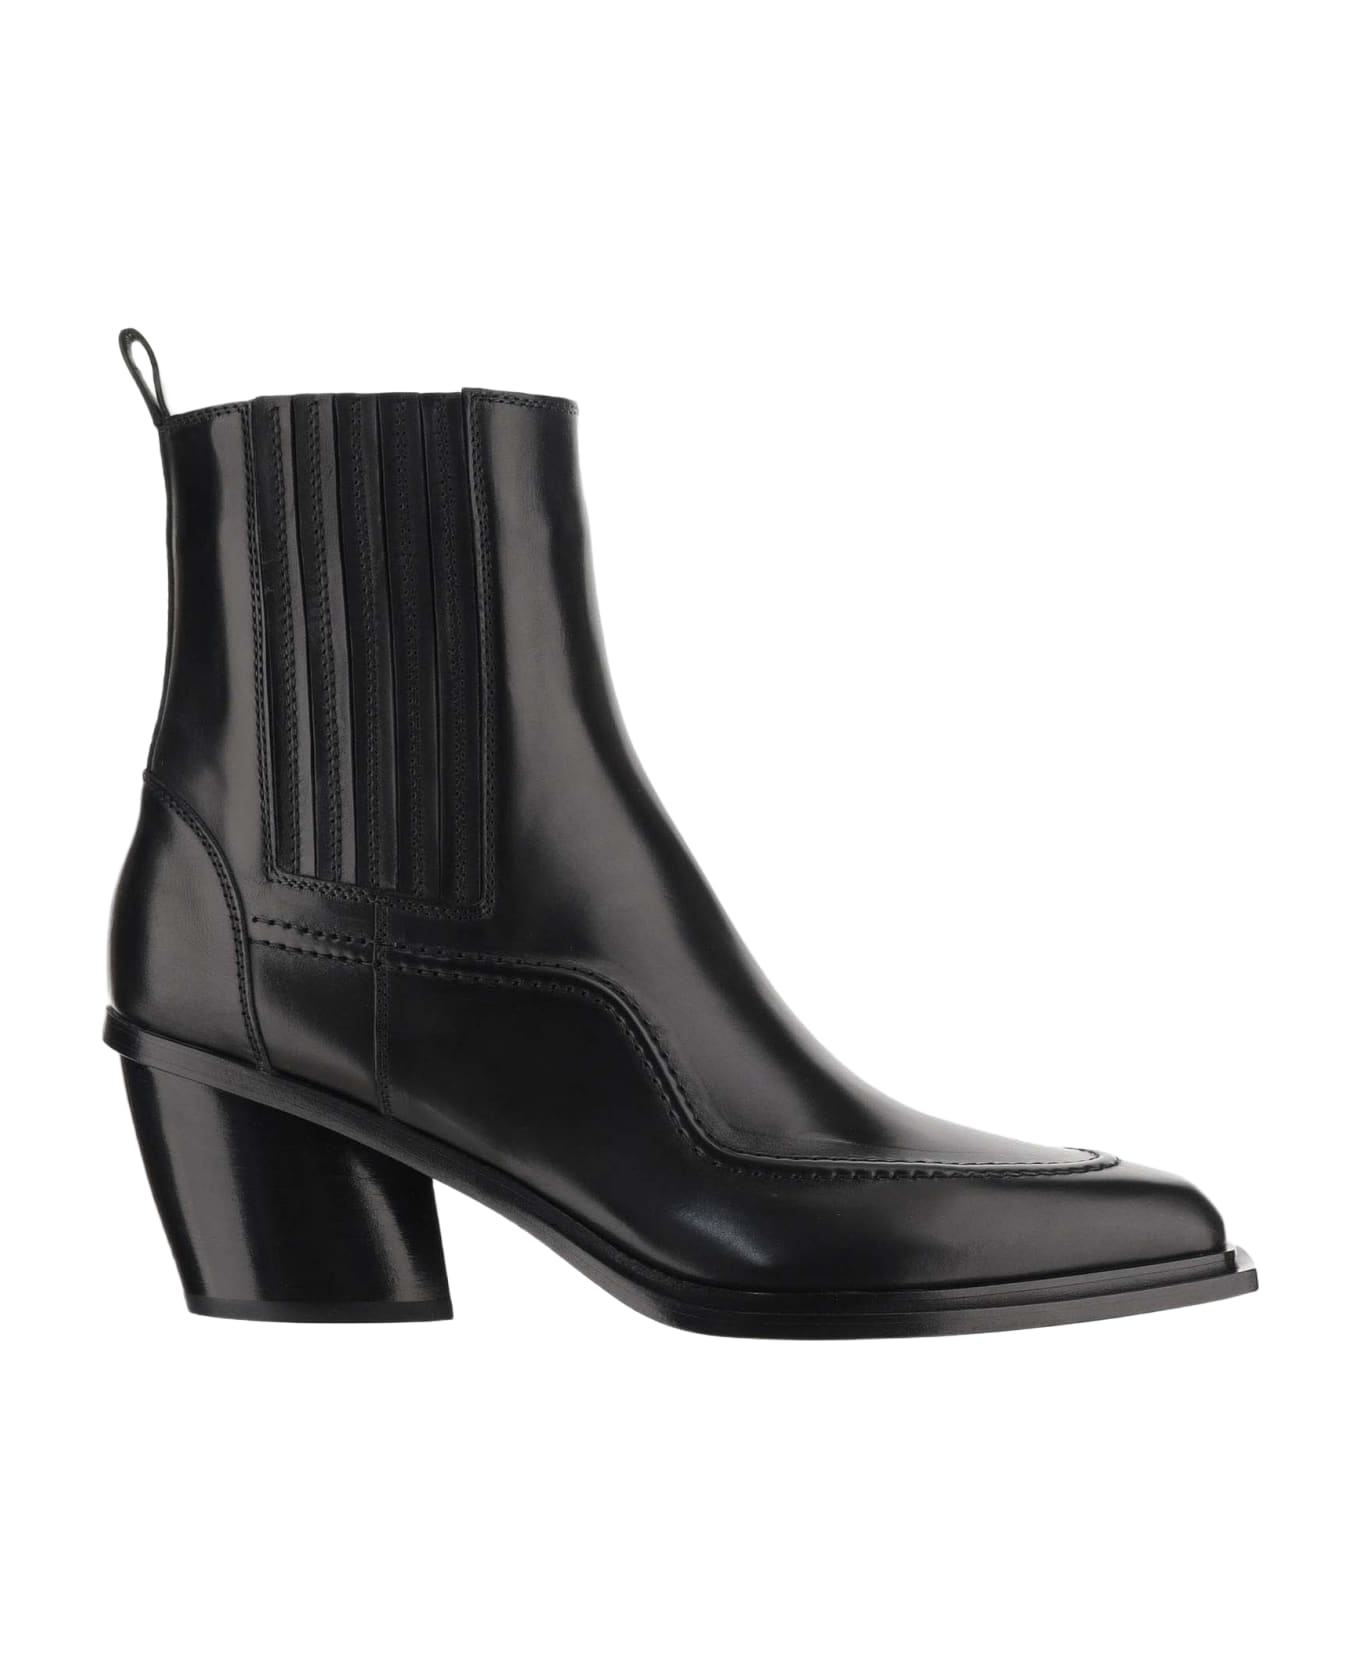 Sartore Leather Boots - Black